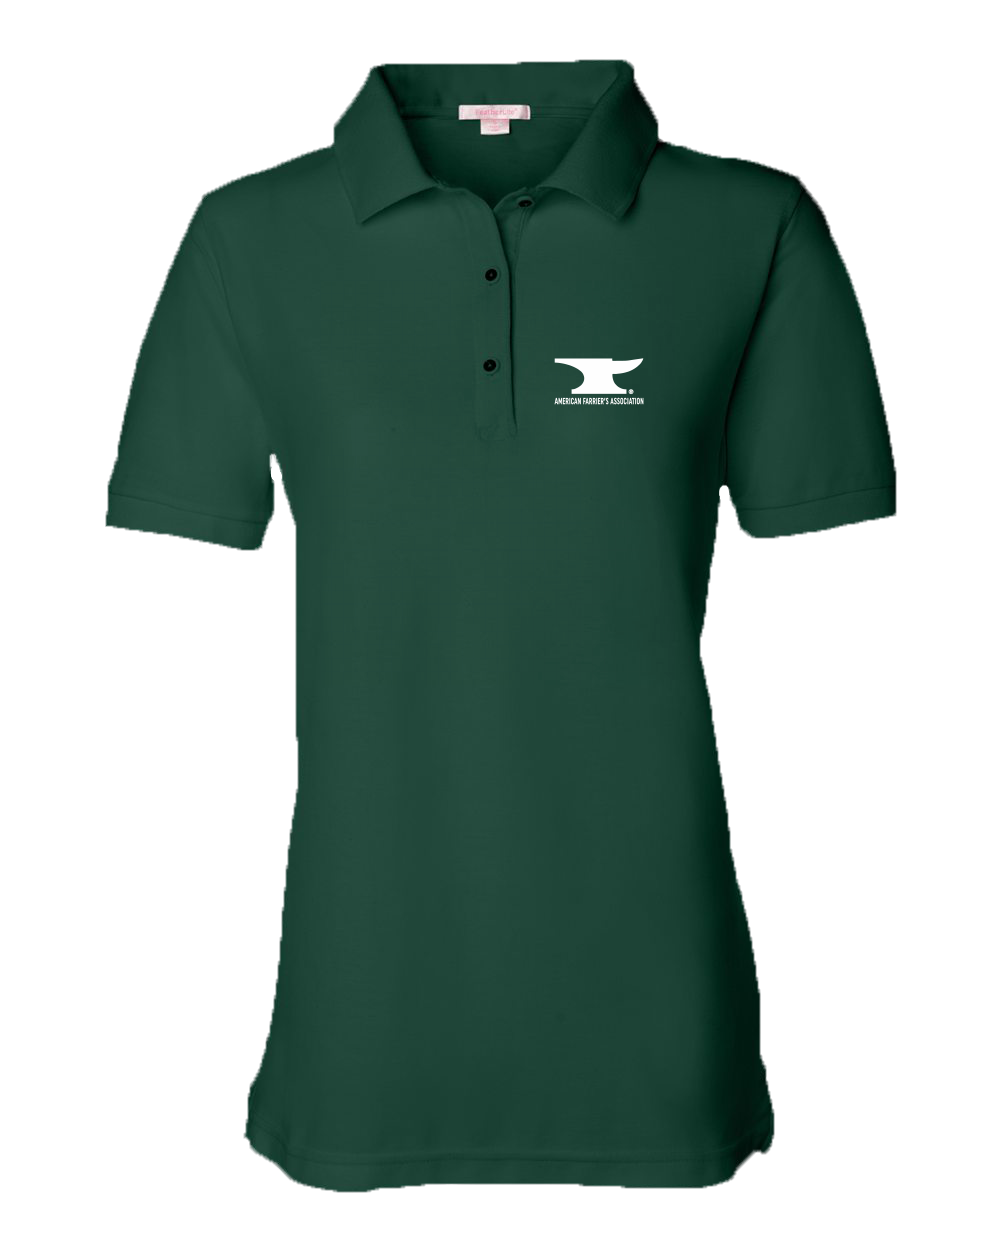 Ladies Pique Polo Forest Green Men's or Ladies' Short Sleeve Polo